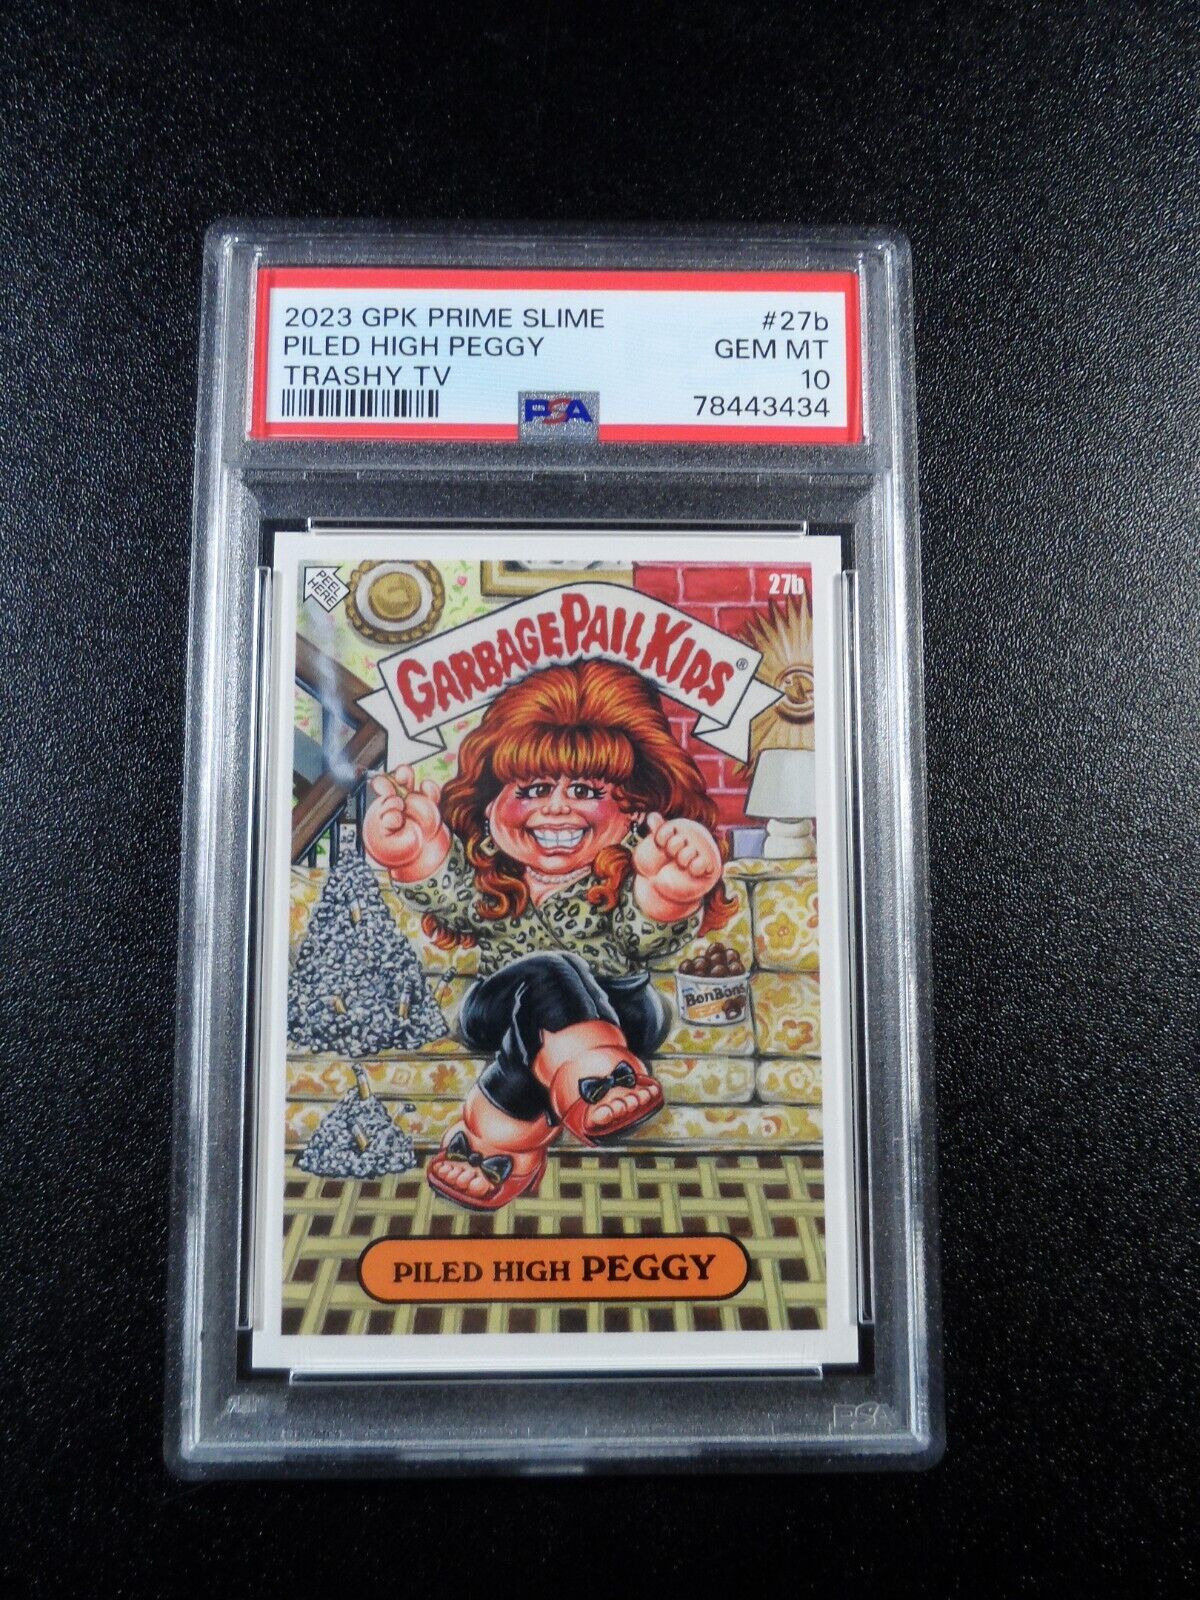 PSA 10 Piled High Peggy Card 27b Garbage Pail Kids Married With Children Spoof